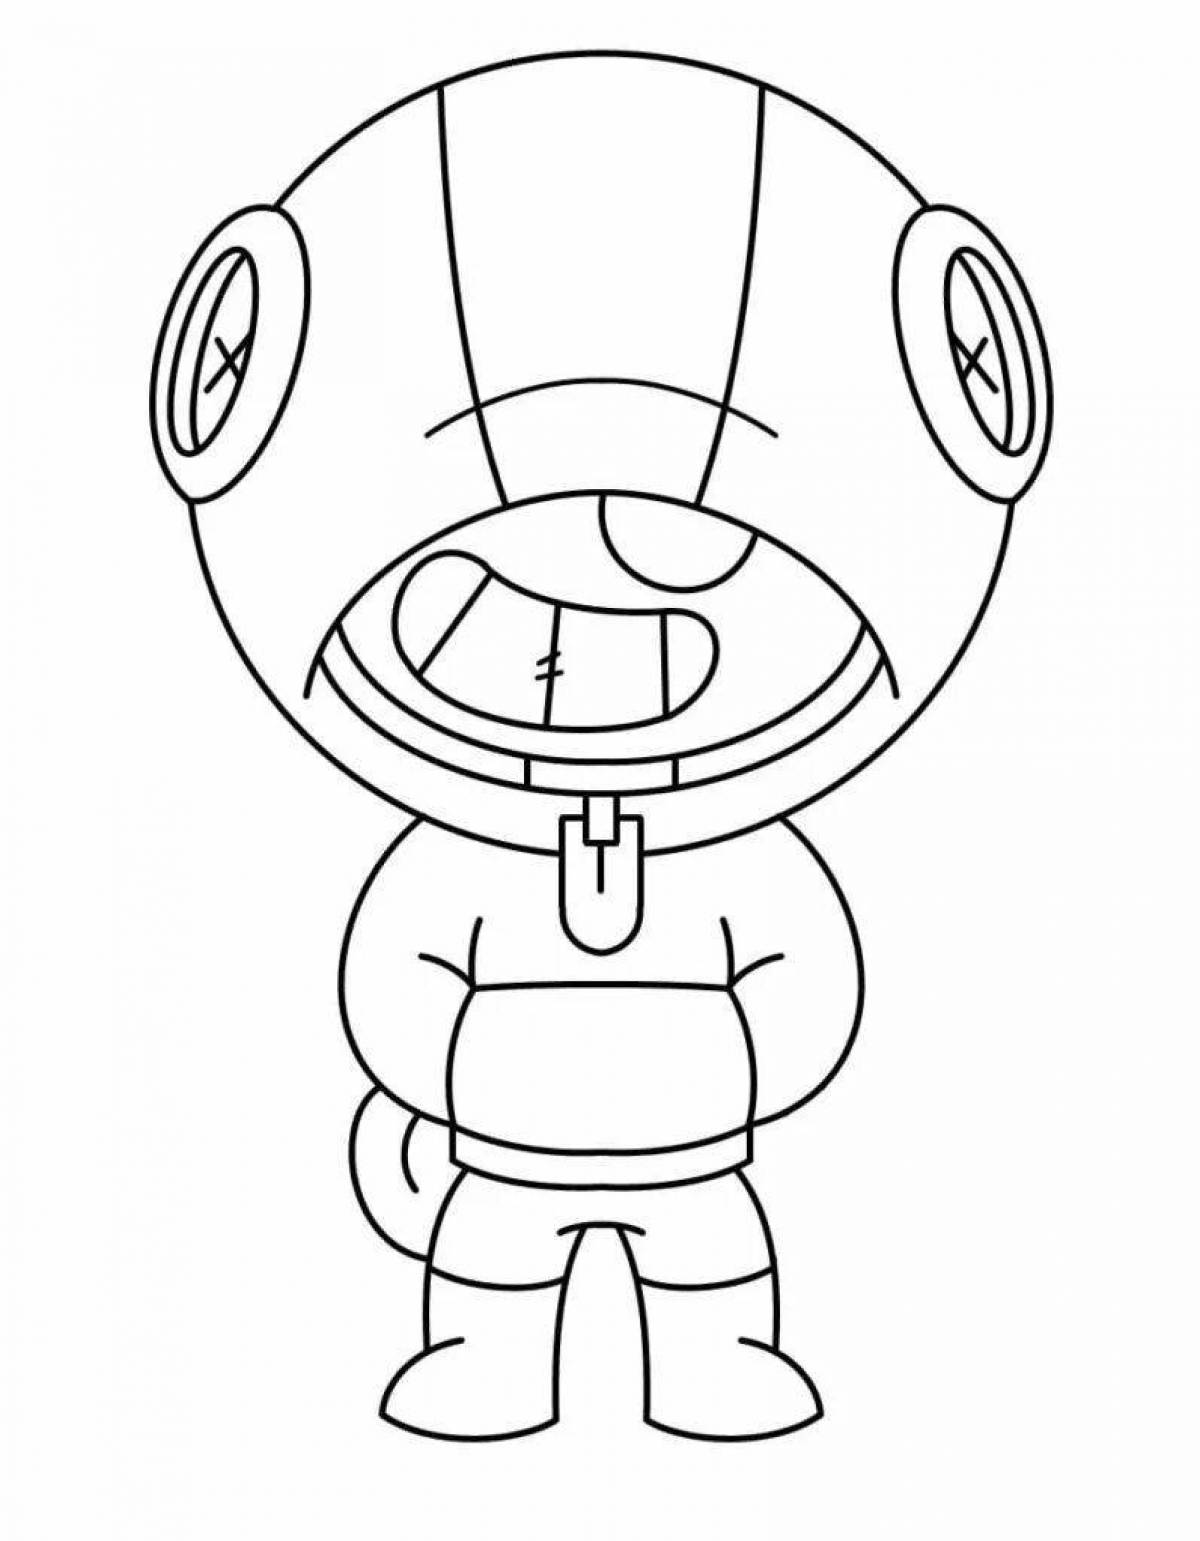 Coloring pages of characters from brawl stars